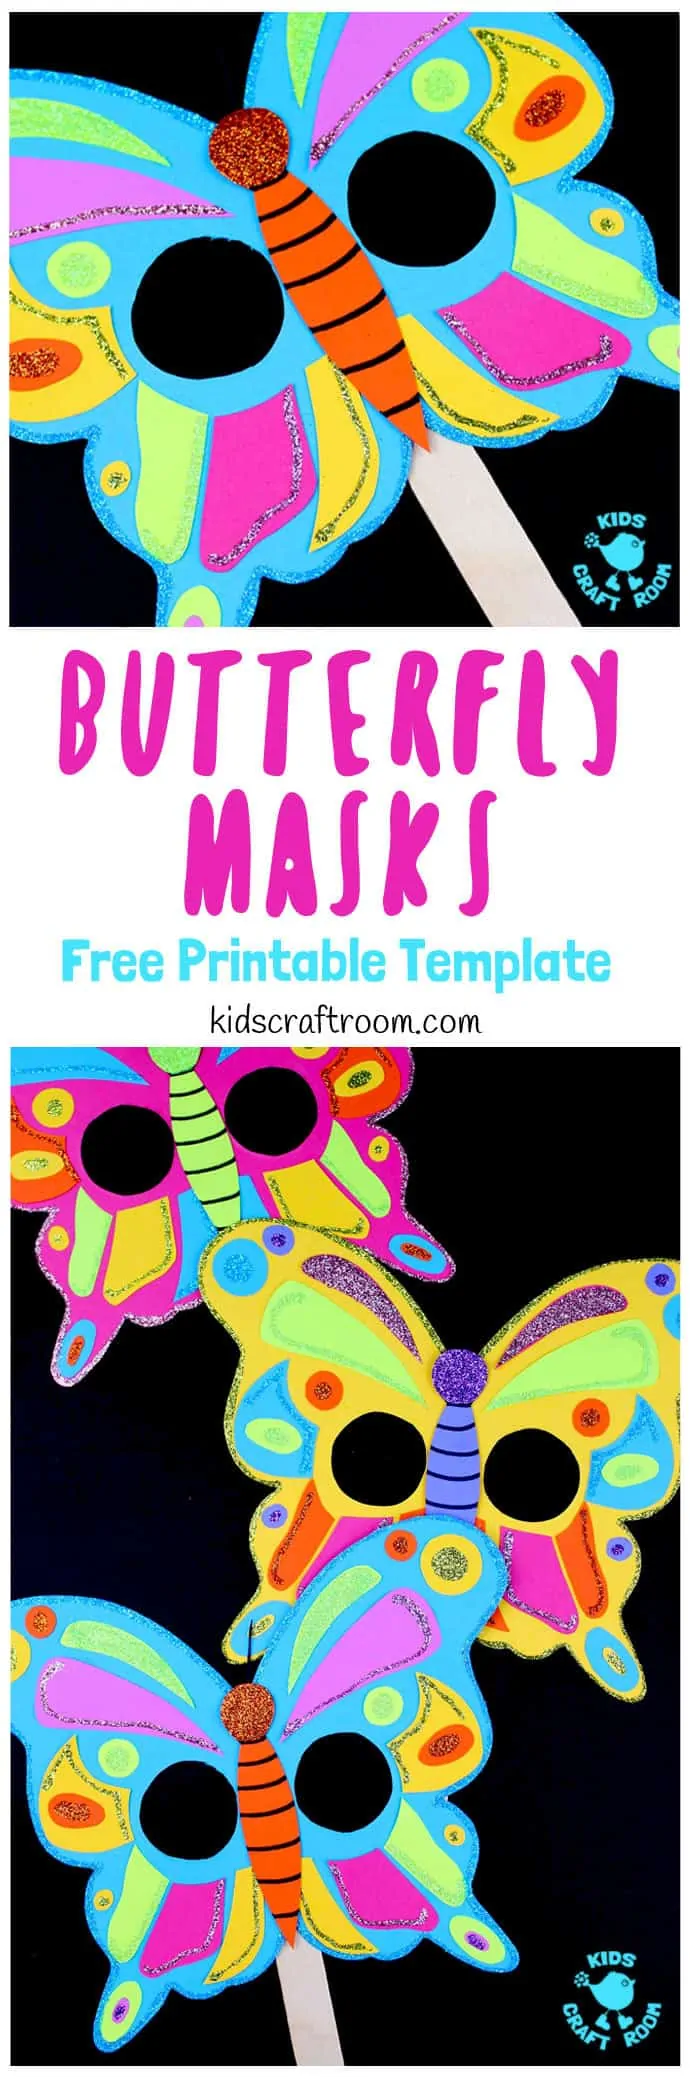 Are your kids fascinated by the butterfly lifecycle? These Colourful Butterfly Masks are a fantastic way to celebrate the wonder of butterflies and engage children in learning all about them. They're easy to make with our free printable template and a fun way to introduce children to symmetry and pattern making too. #butterflies #butterflycrafts #masks #kidscrafts #papercrafts #printables #craftsforkids #kidscraftroom #summercrafts #springcrafts #insectcrafts #kidsactivities #butterfly